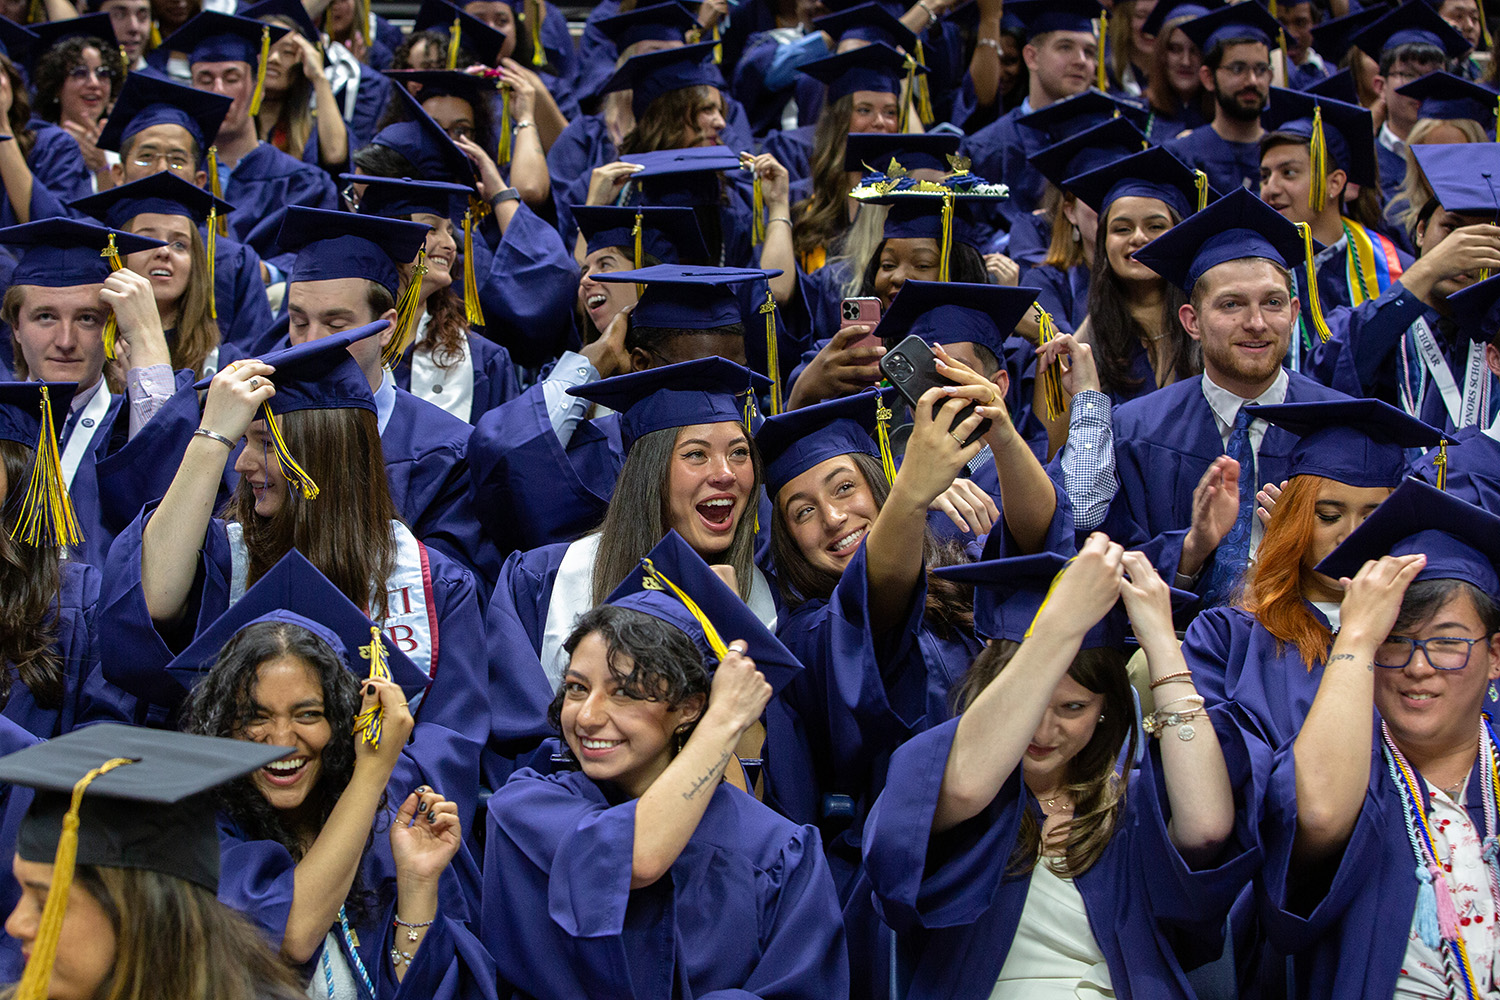 Students in full regalia move their tassels and pose for selfies during commencement.